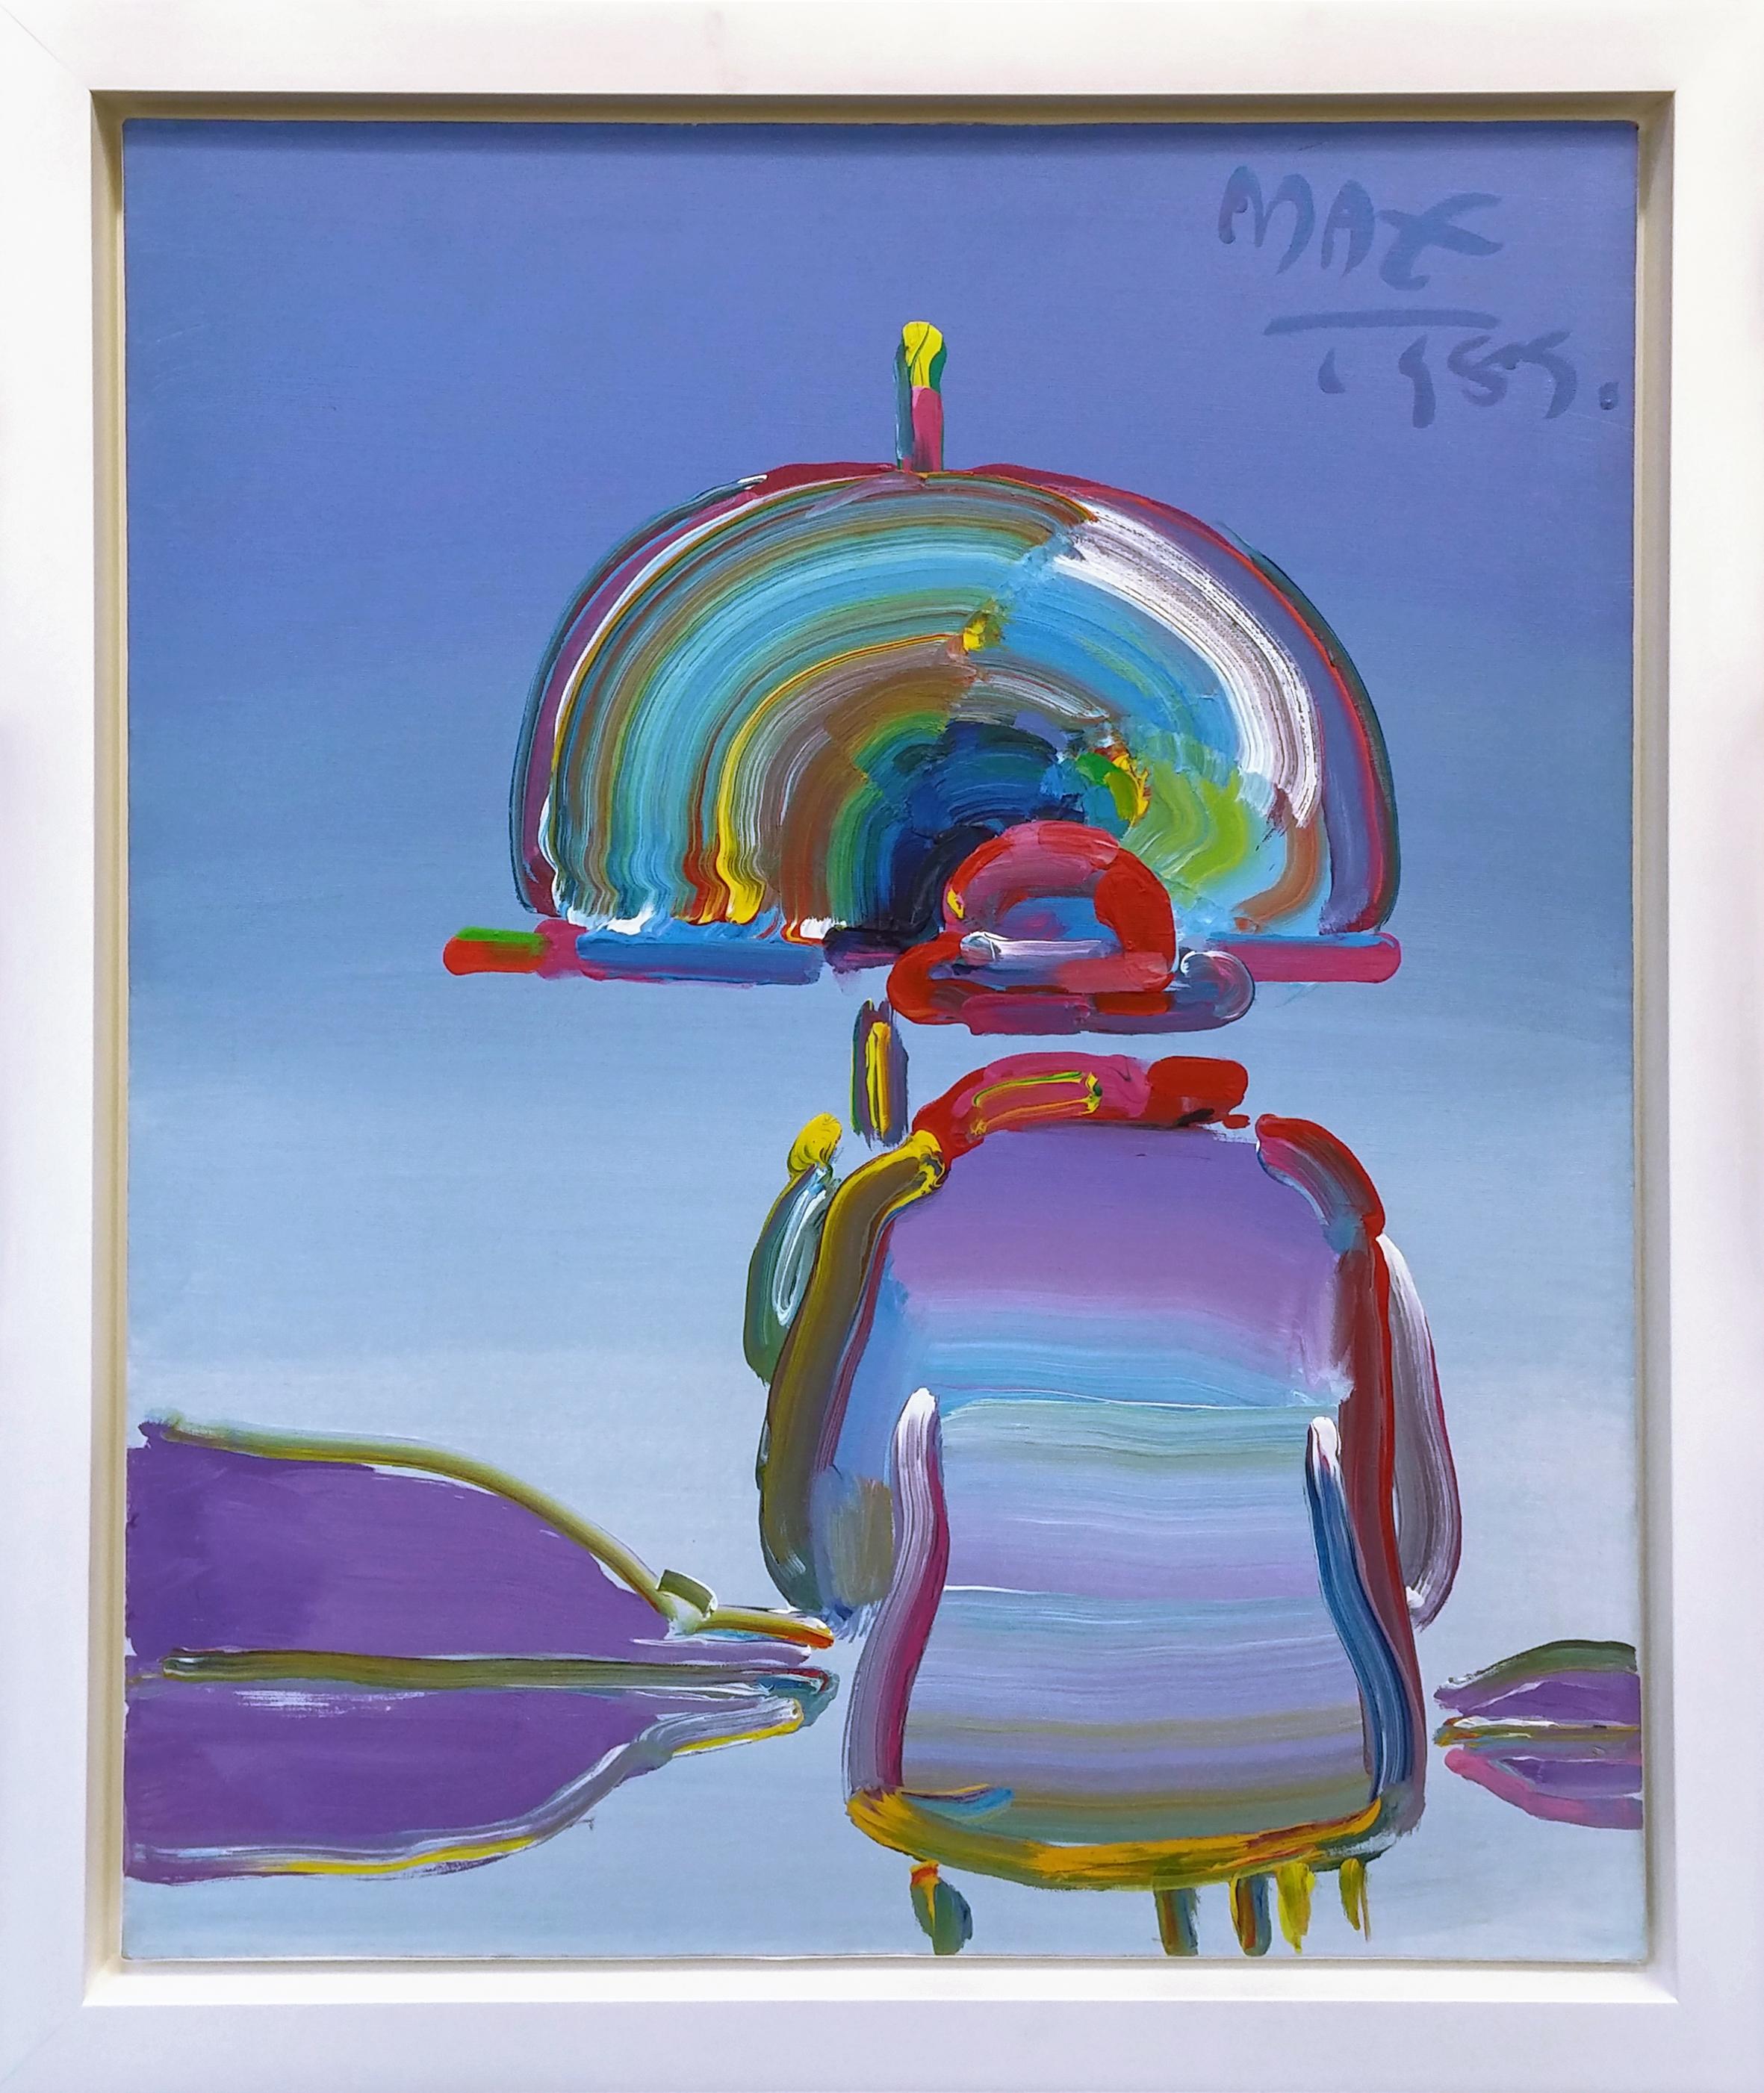 UMBRELLA MAN - Painting by Peter Max